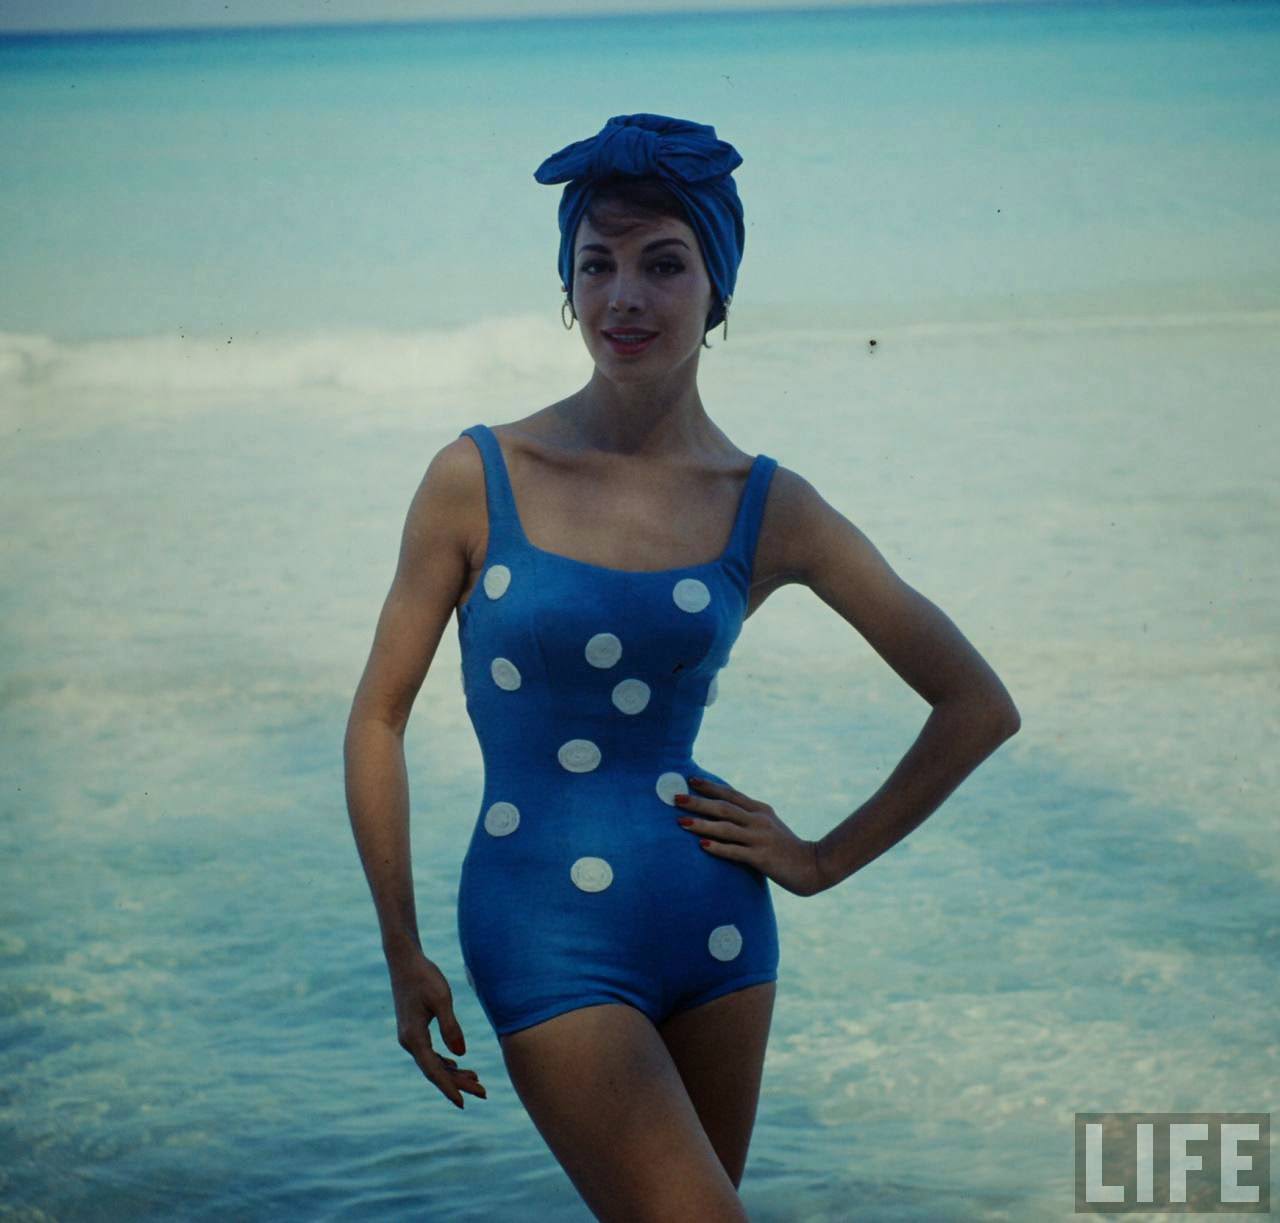 Bathing Beauties of 1950s Cuba: A Stunning Collection of Swimsuit Models by Gordon Parks